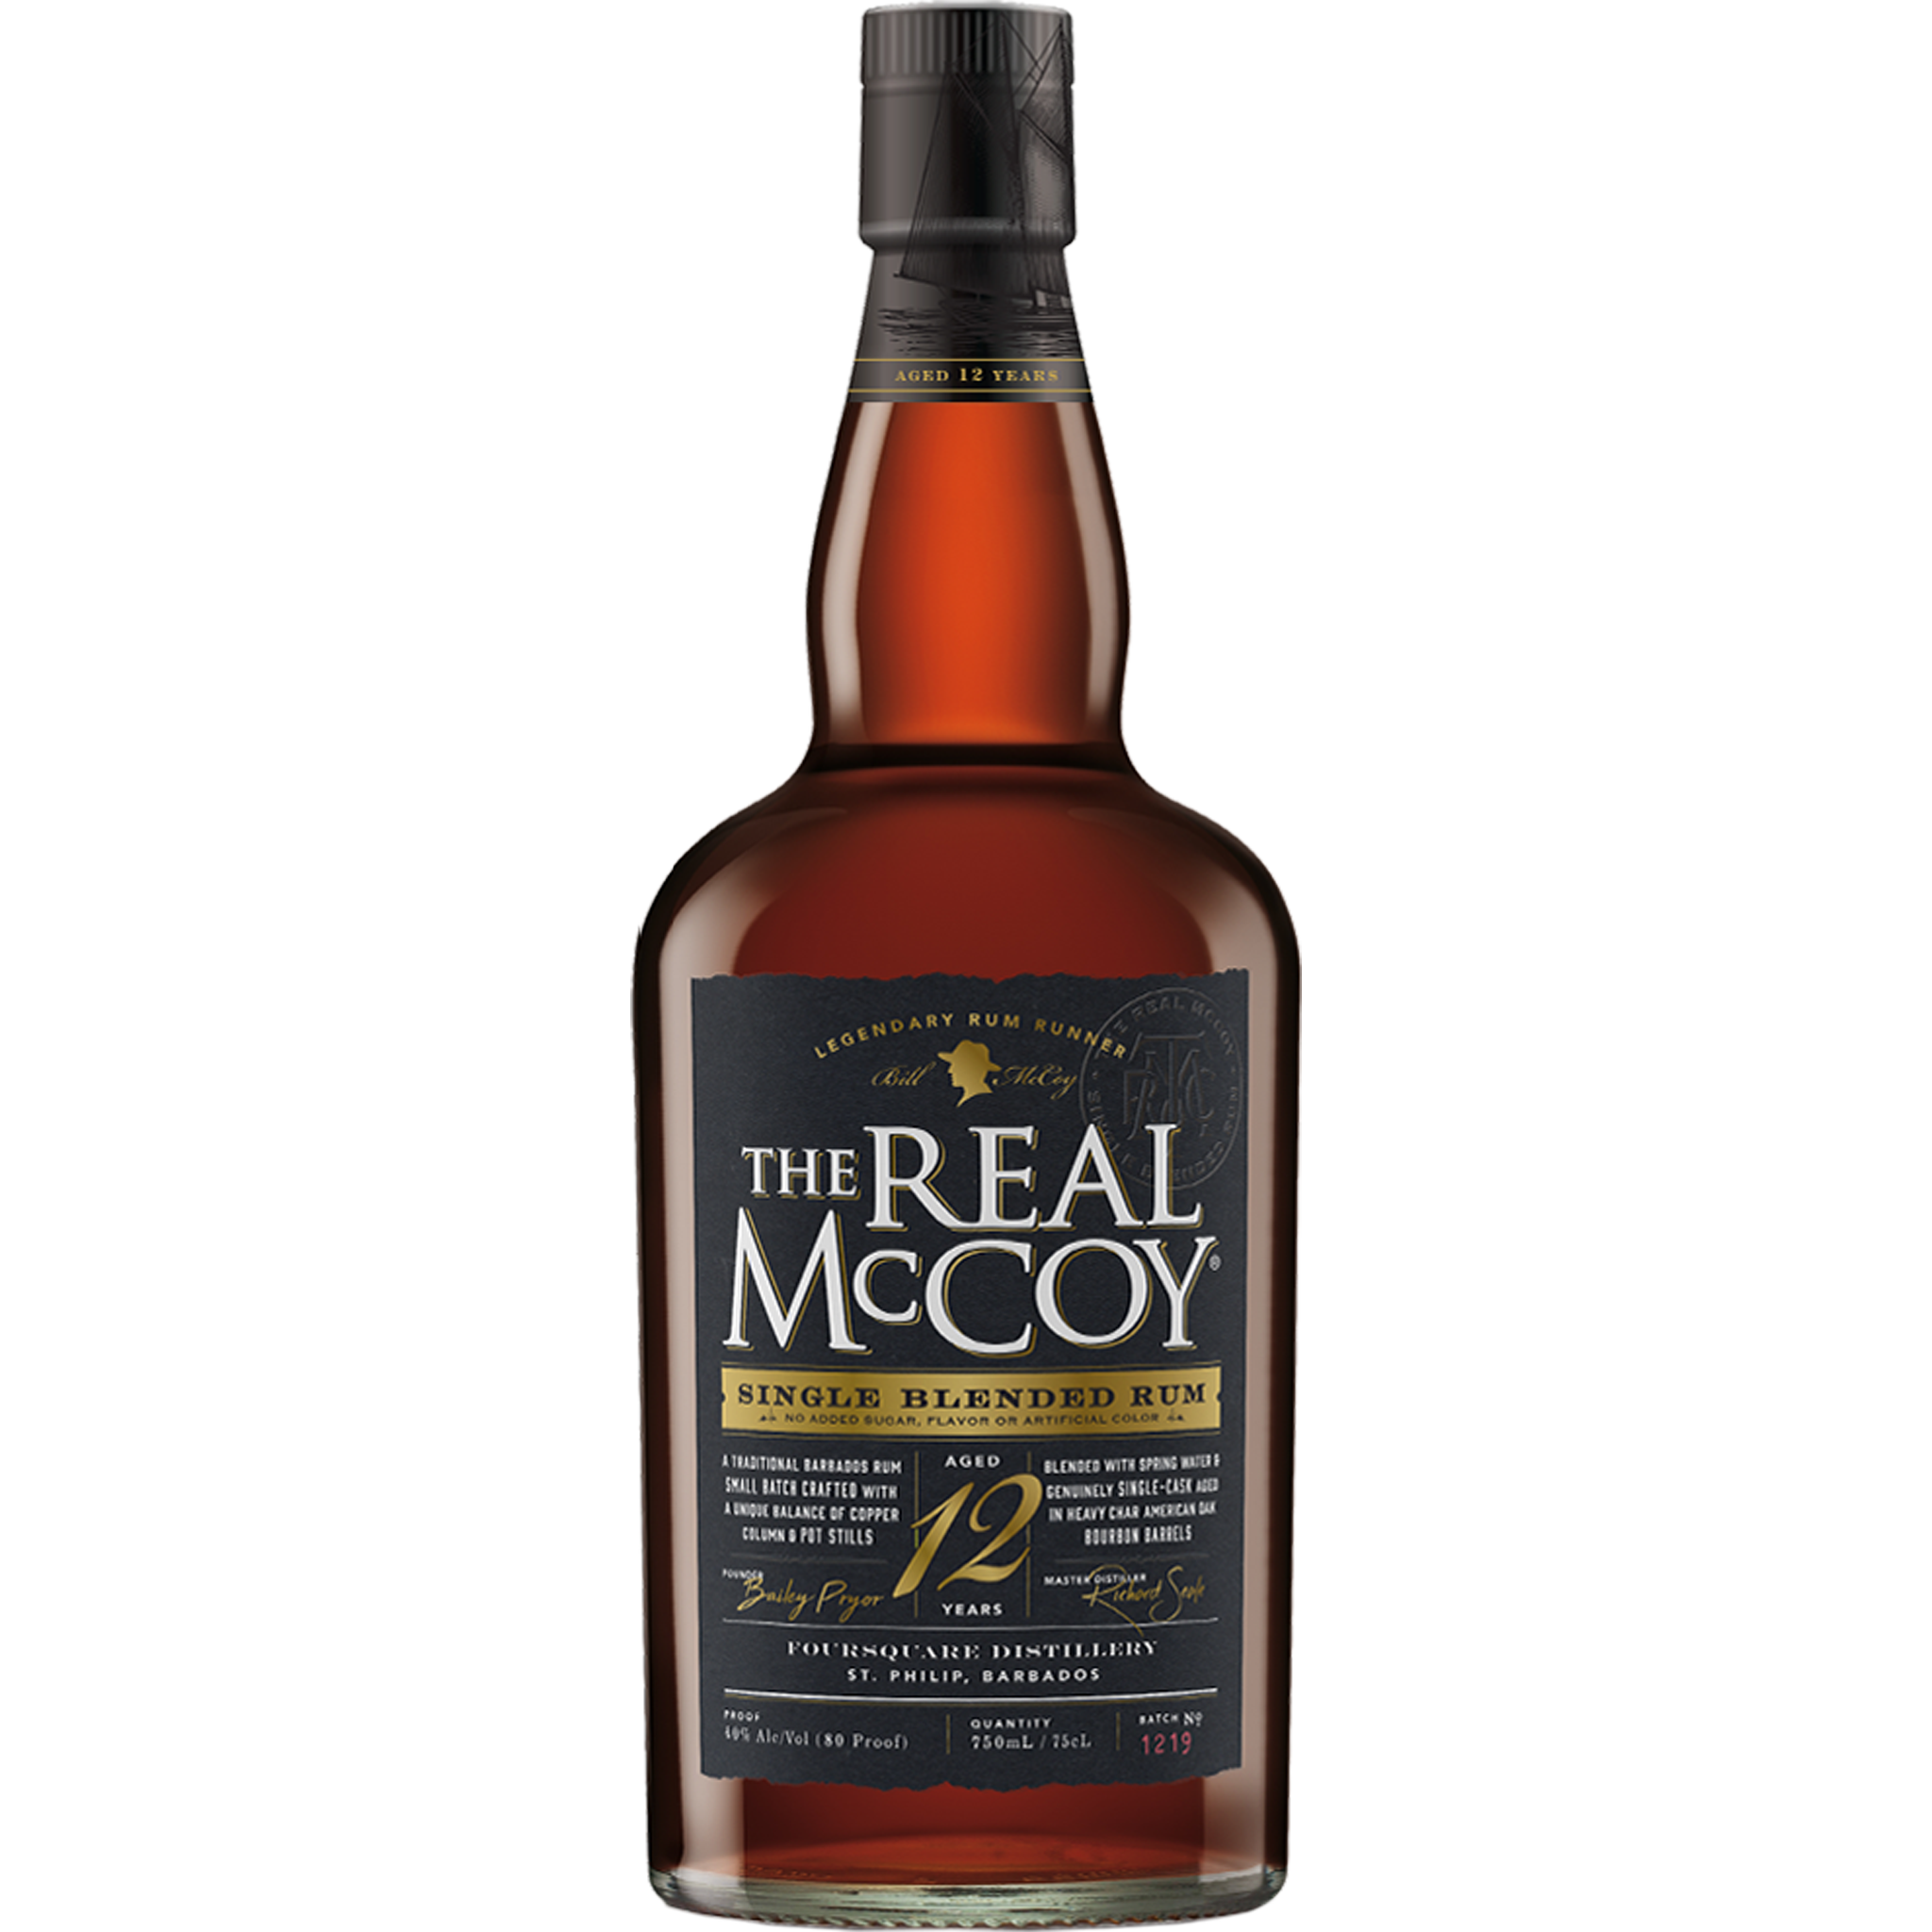 The Real Mccoy Rum 12 Years 92 Proof